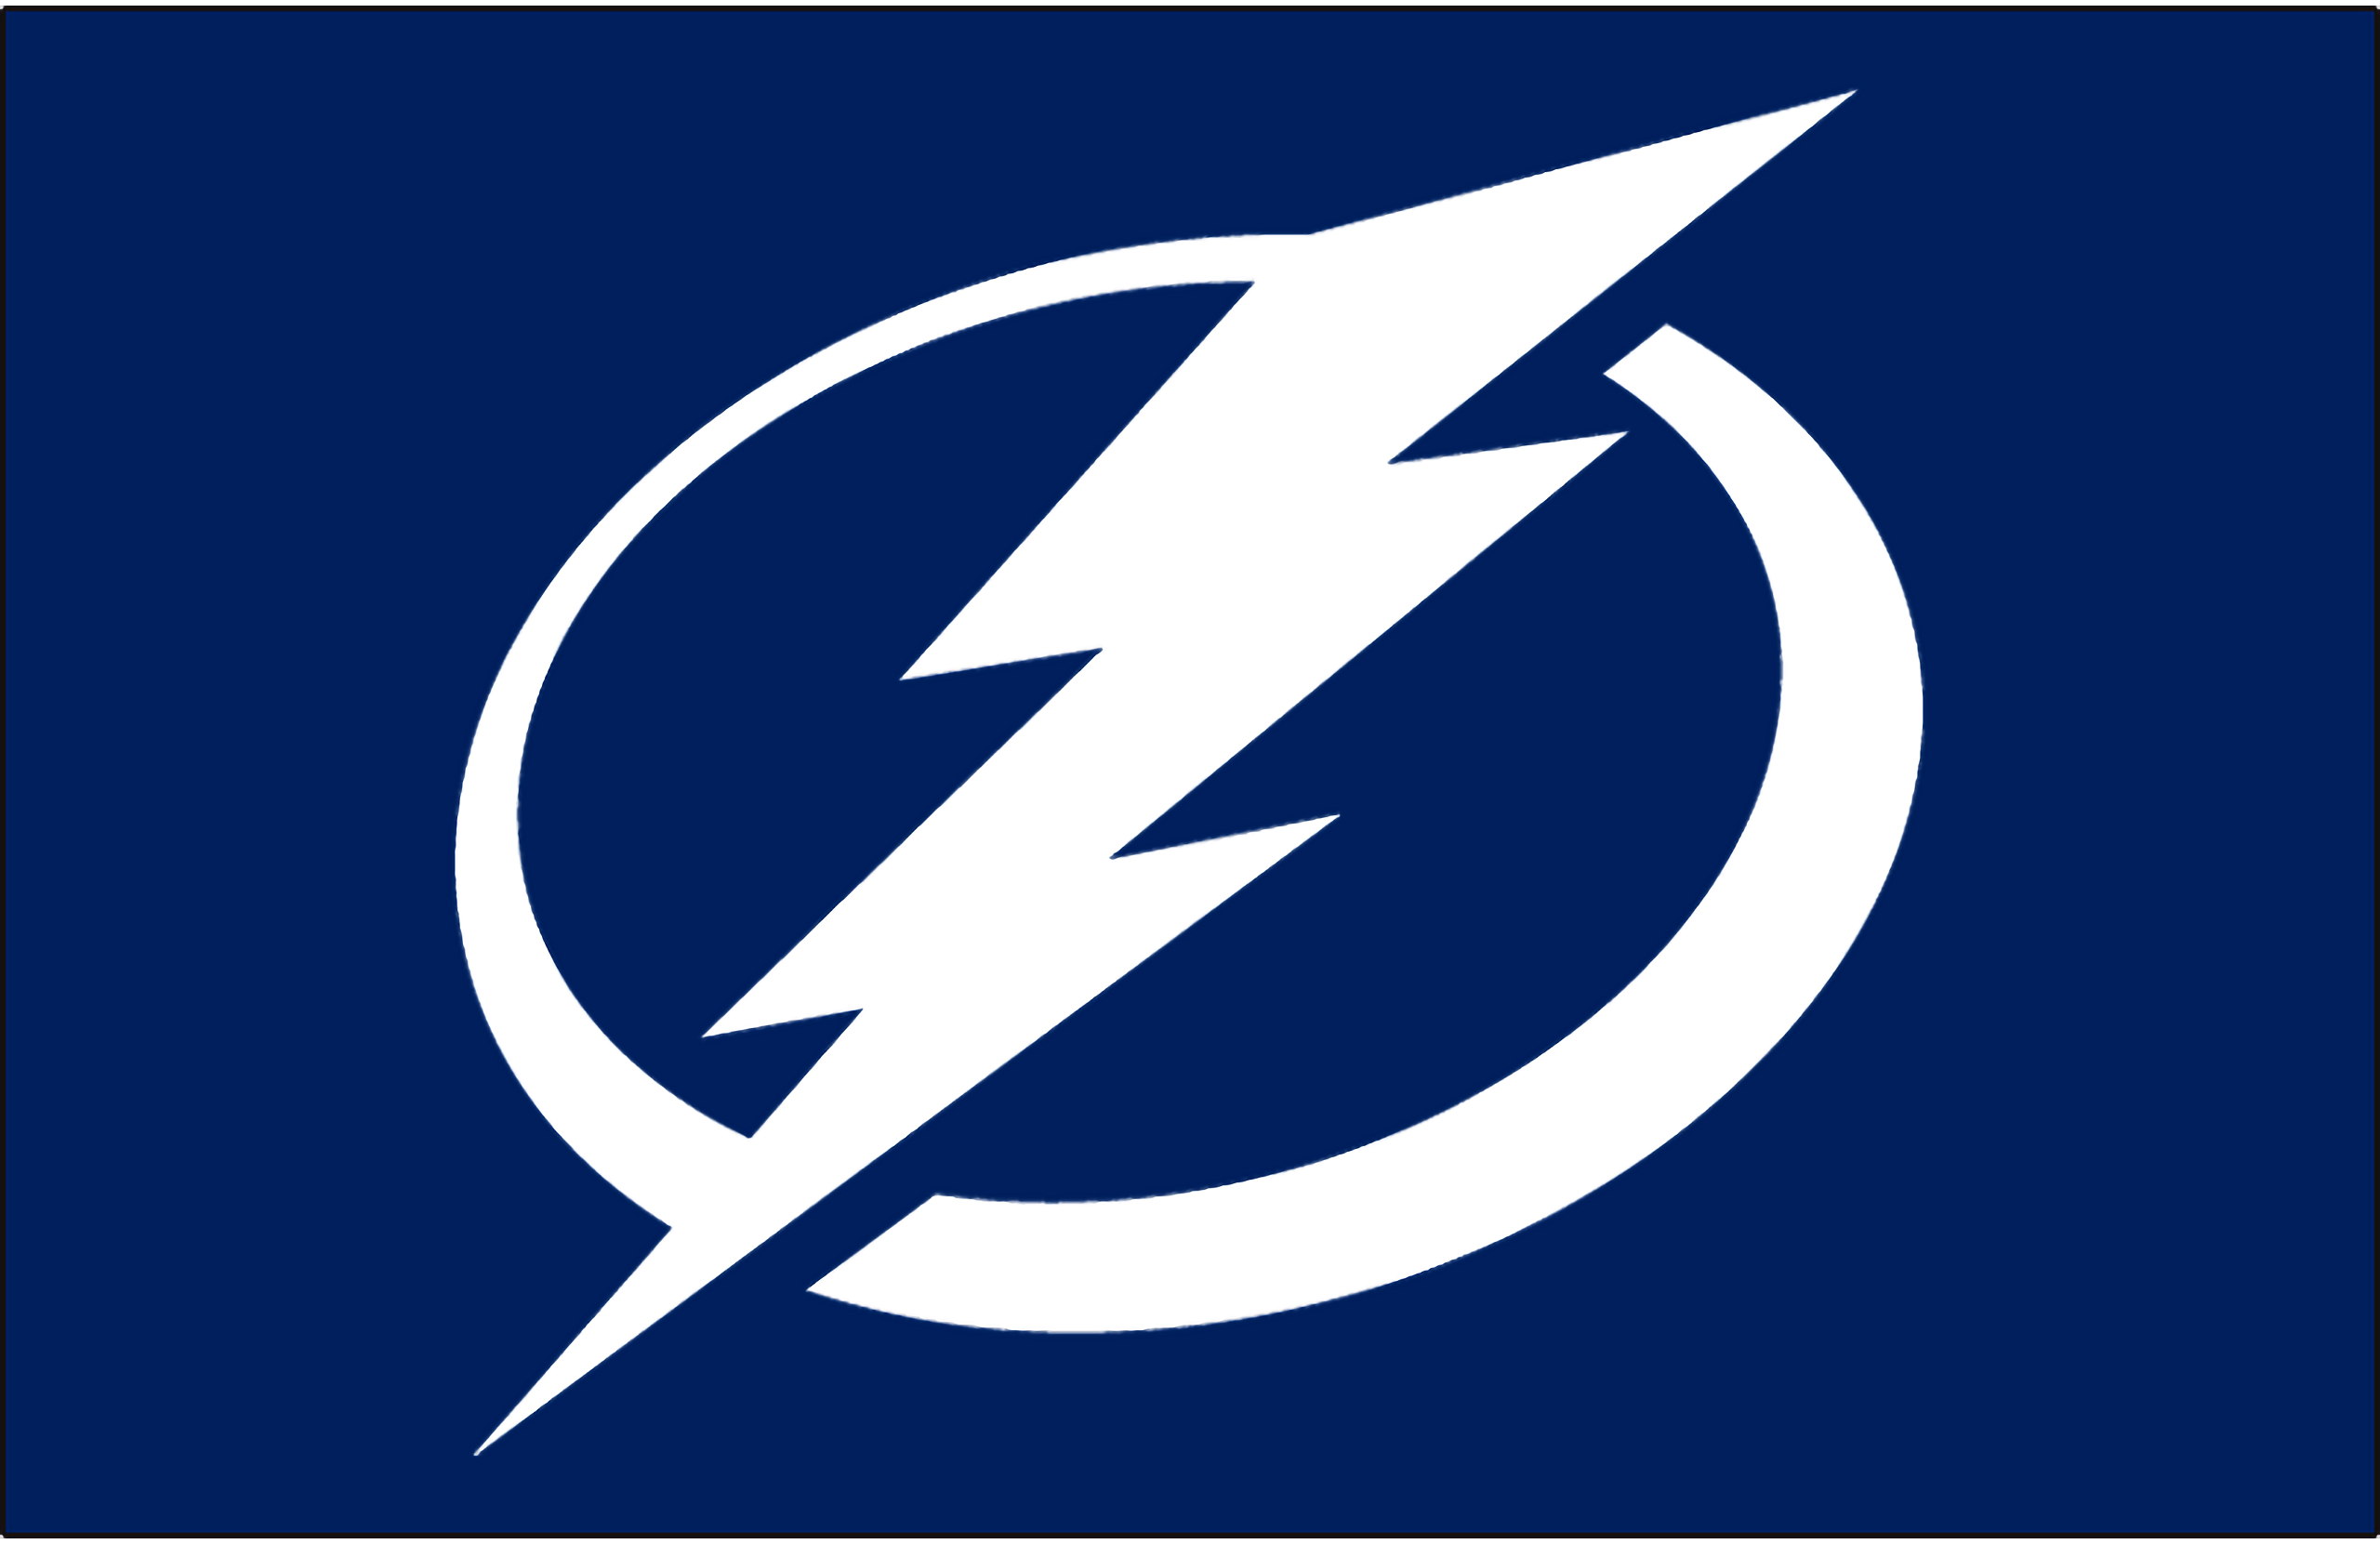 Download Tampa Bay Lightning wallpapers for mobile phone, free Tampa Bay  Lightning HD pictures